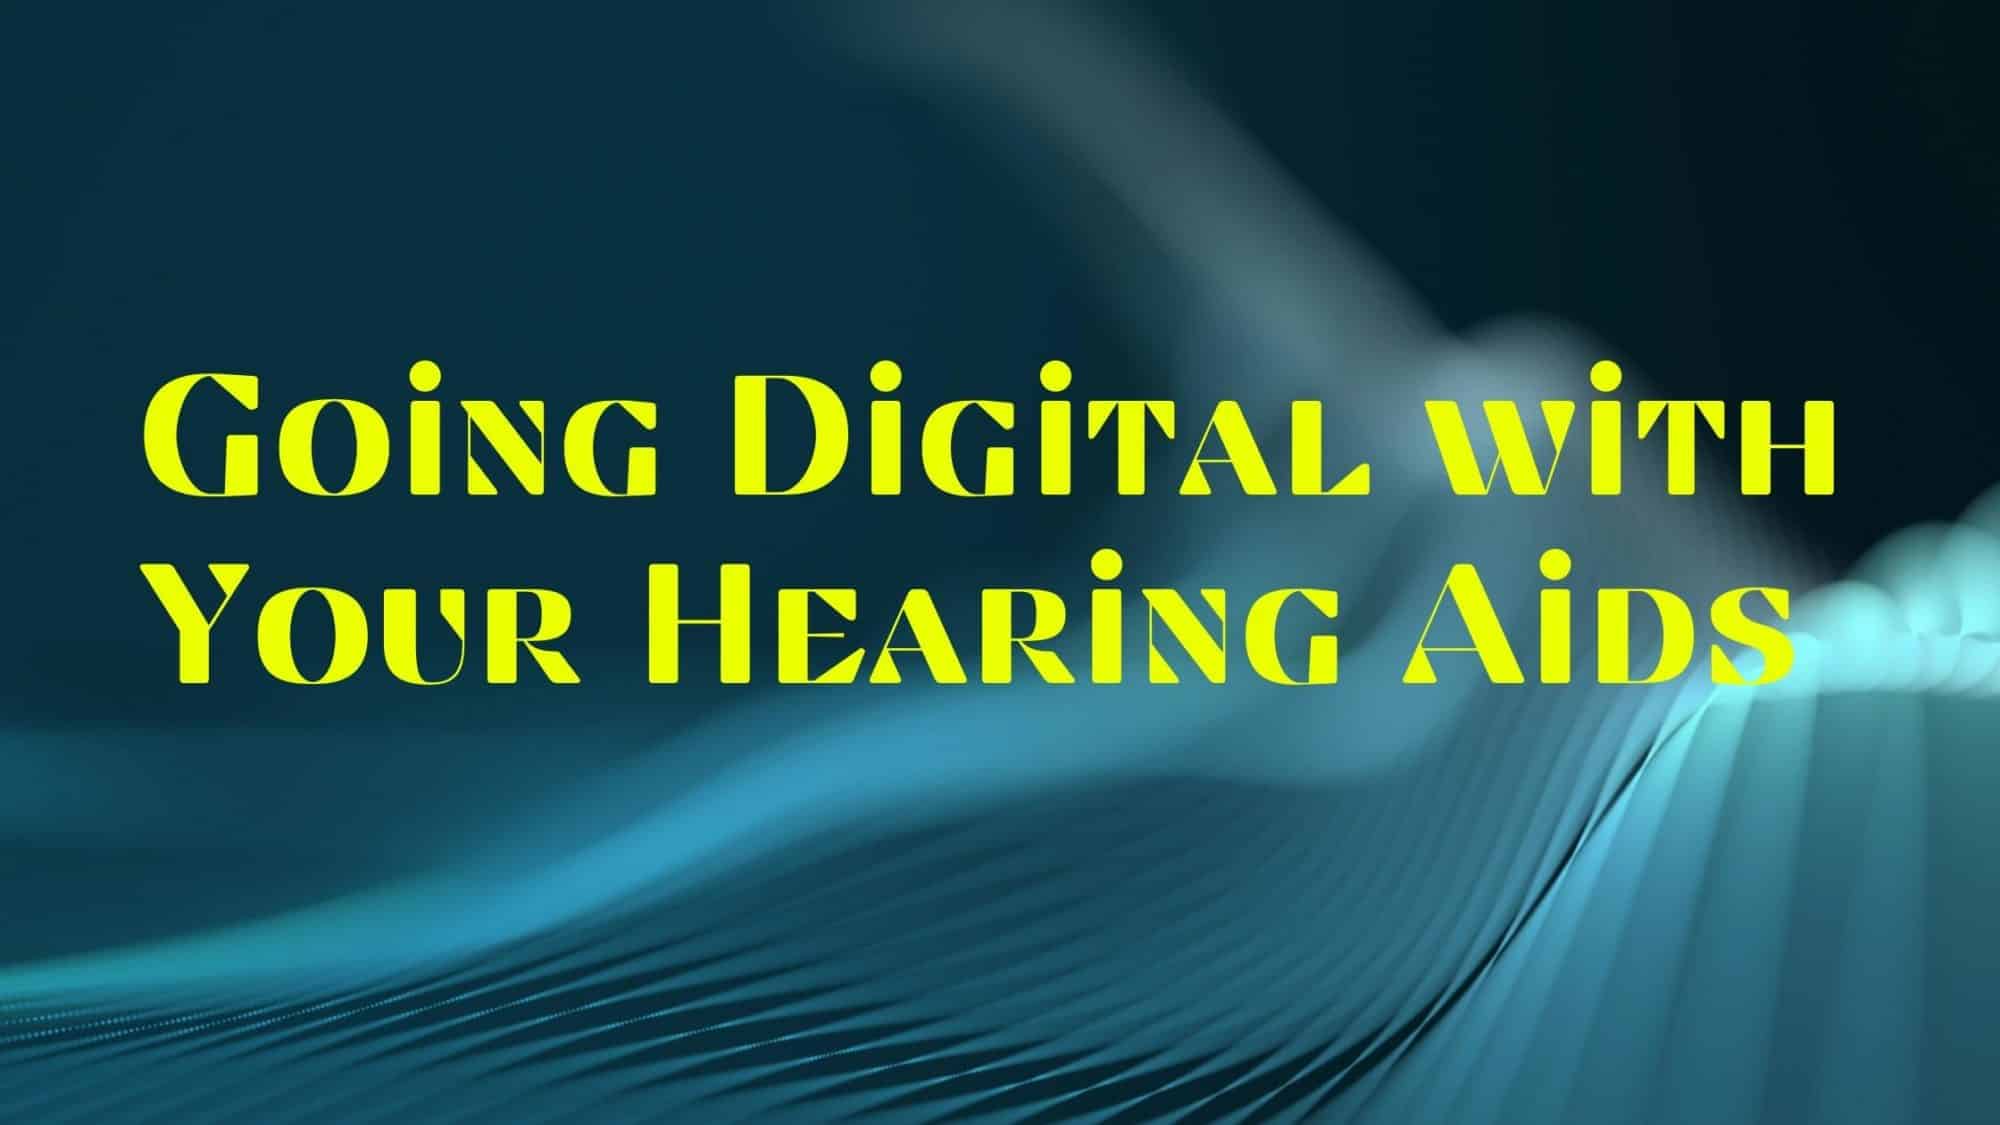 Going Digital With Your Hearing Aids